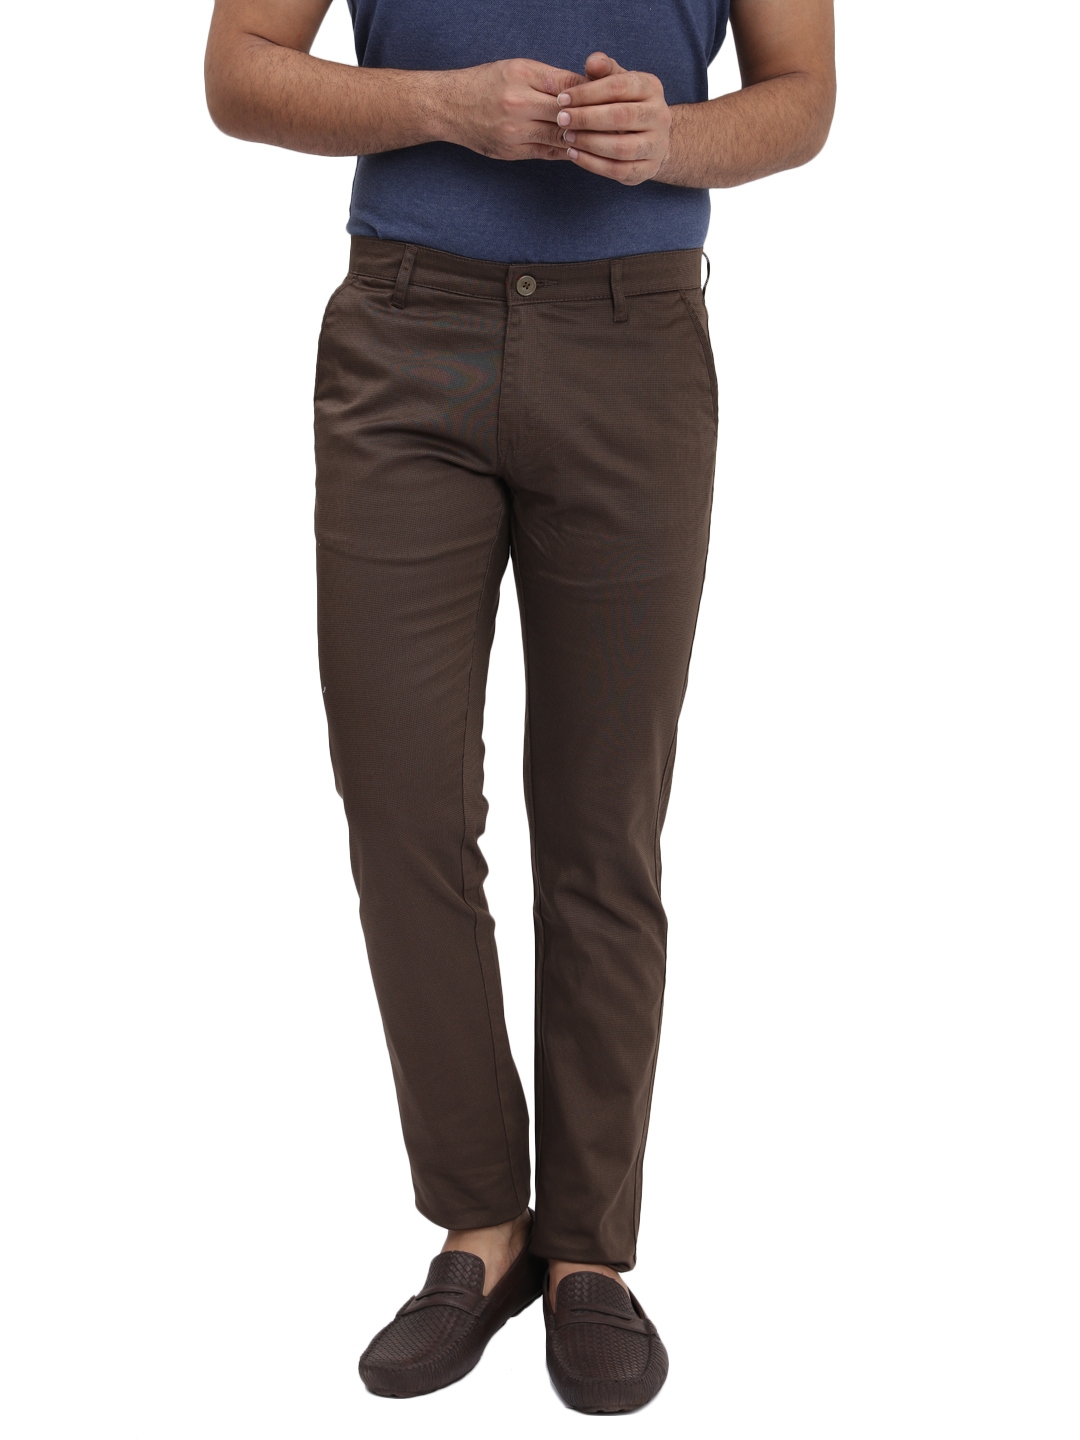 D'cot by Donear Men's Brown Cotton Trousers